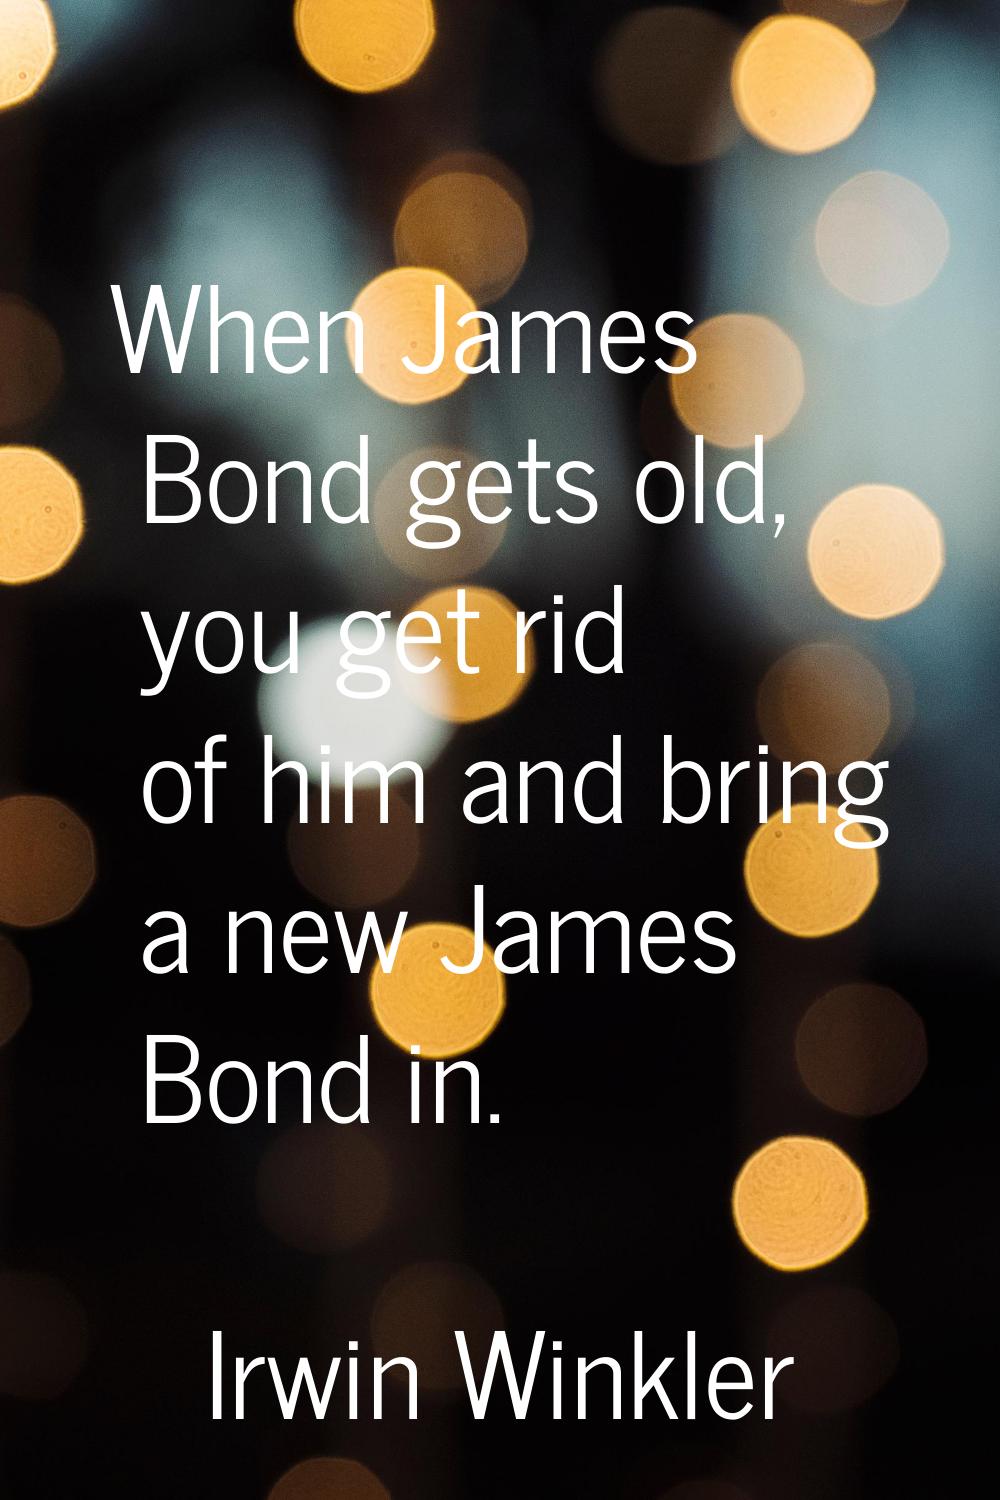 When James Bond gets old, you get rid of him and bring a new James Bond in.